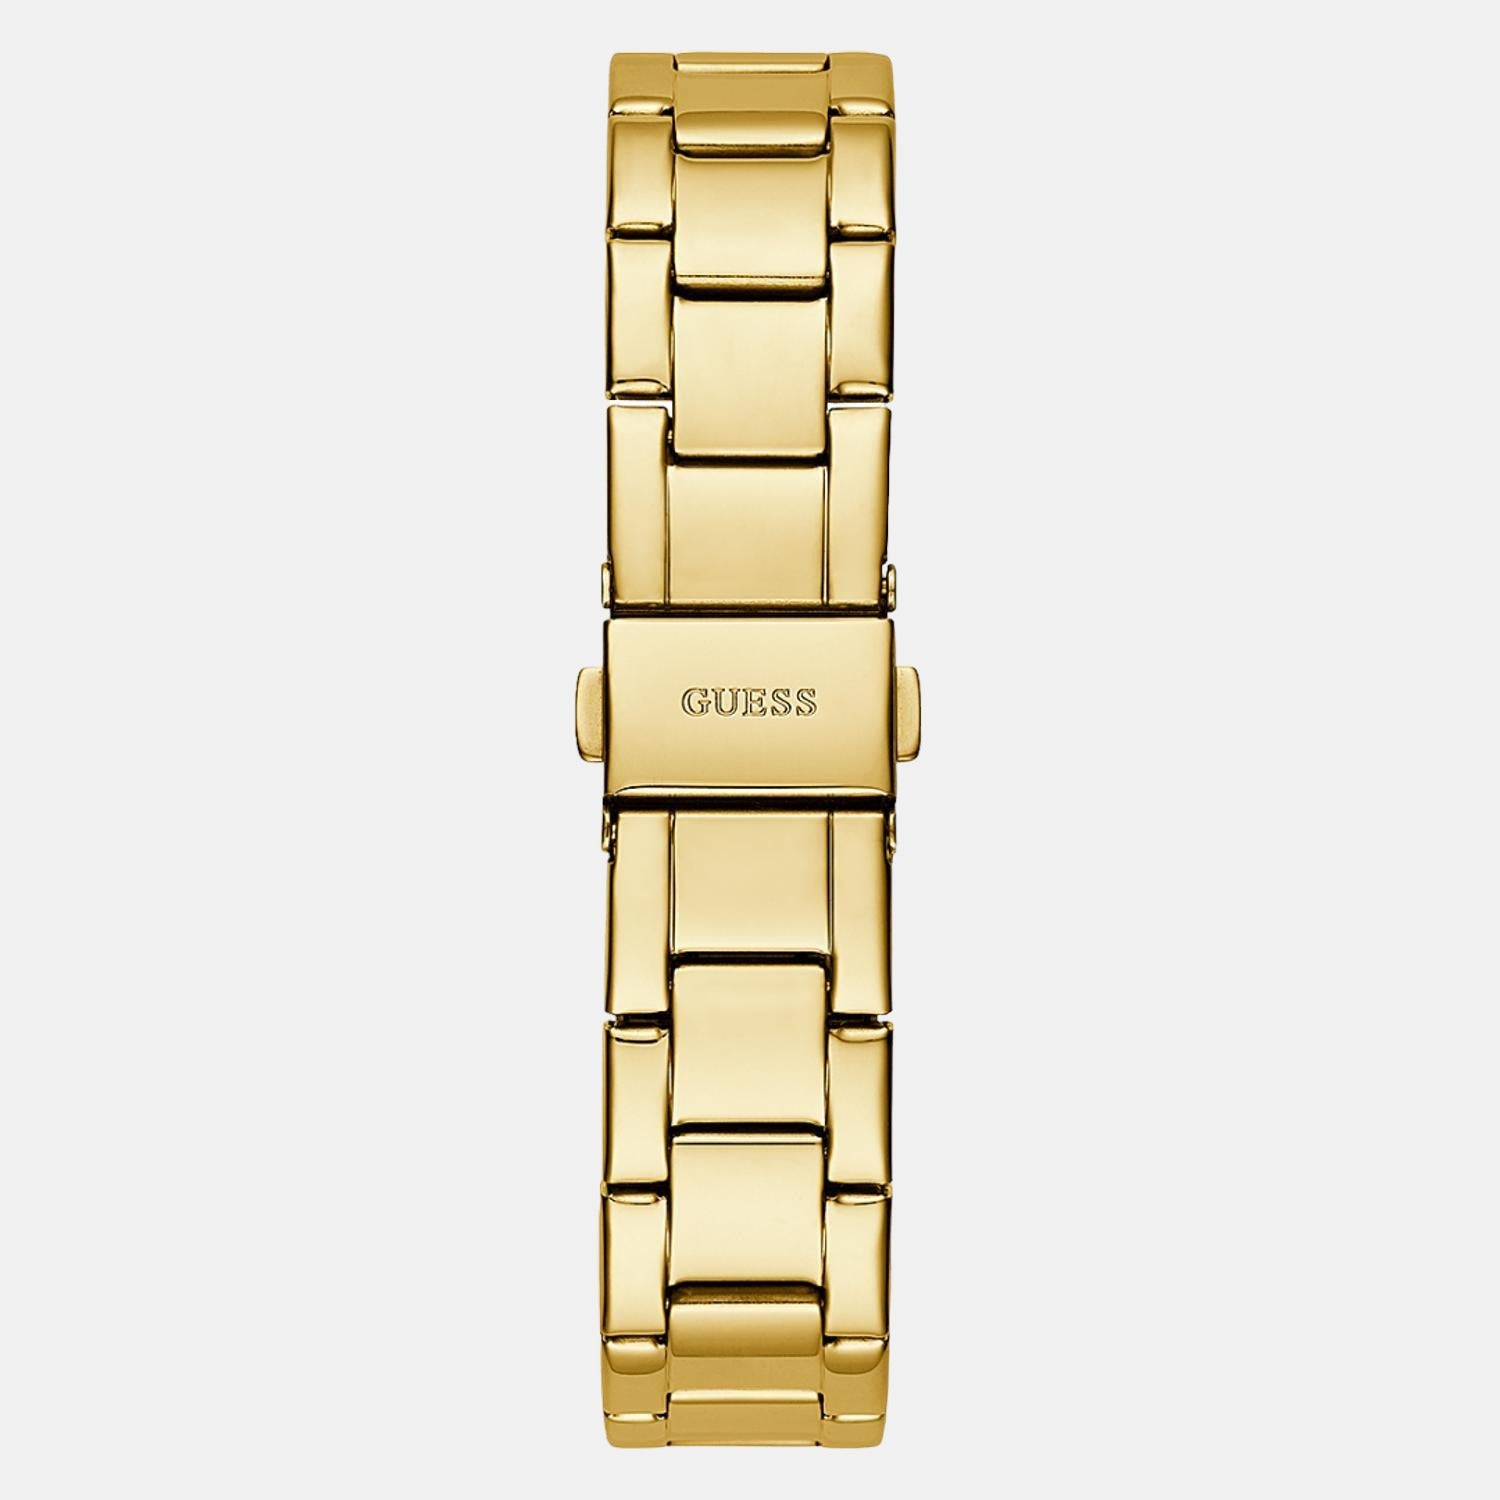 guess-stainless-steel-gold-analog-men-watch-gw0465l1